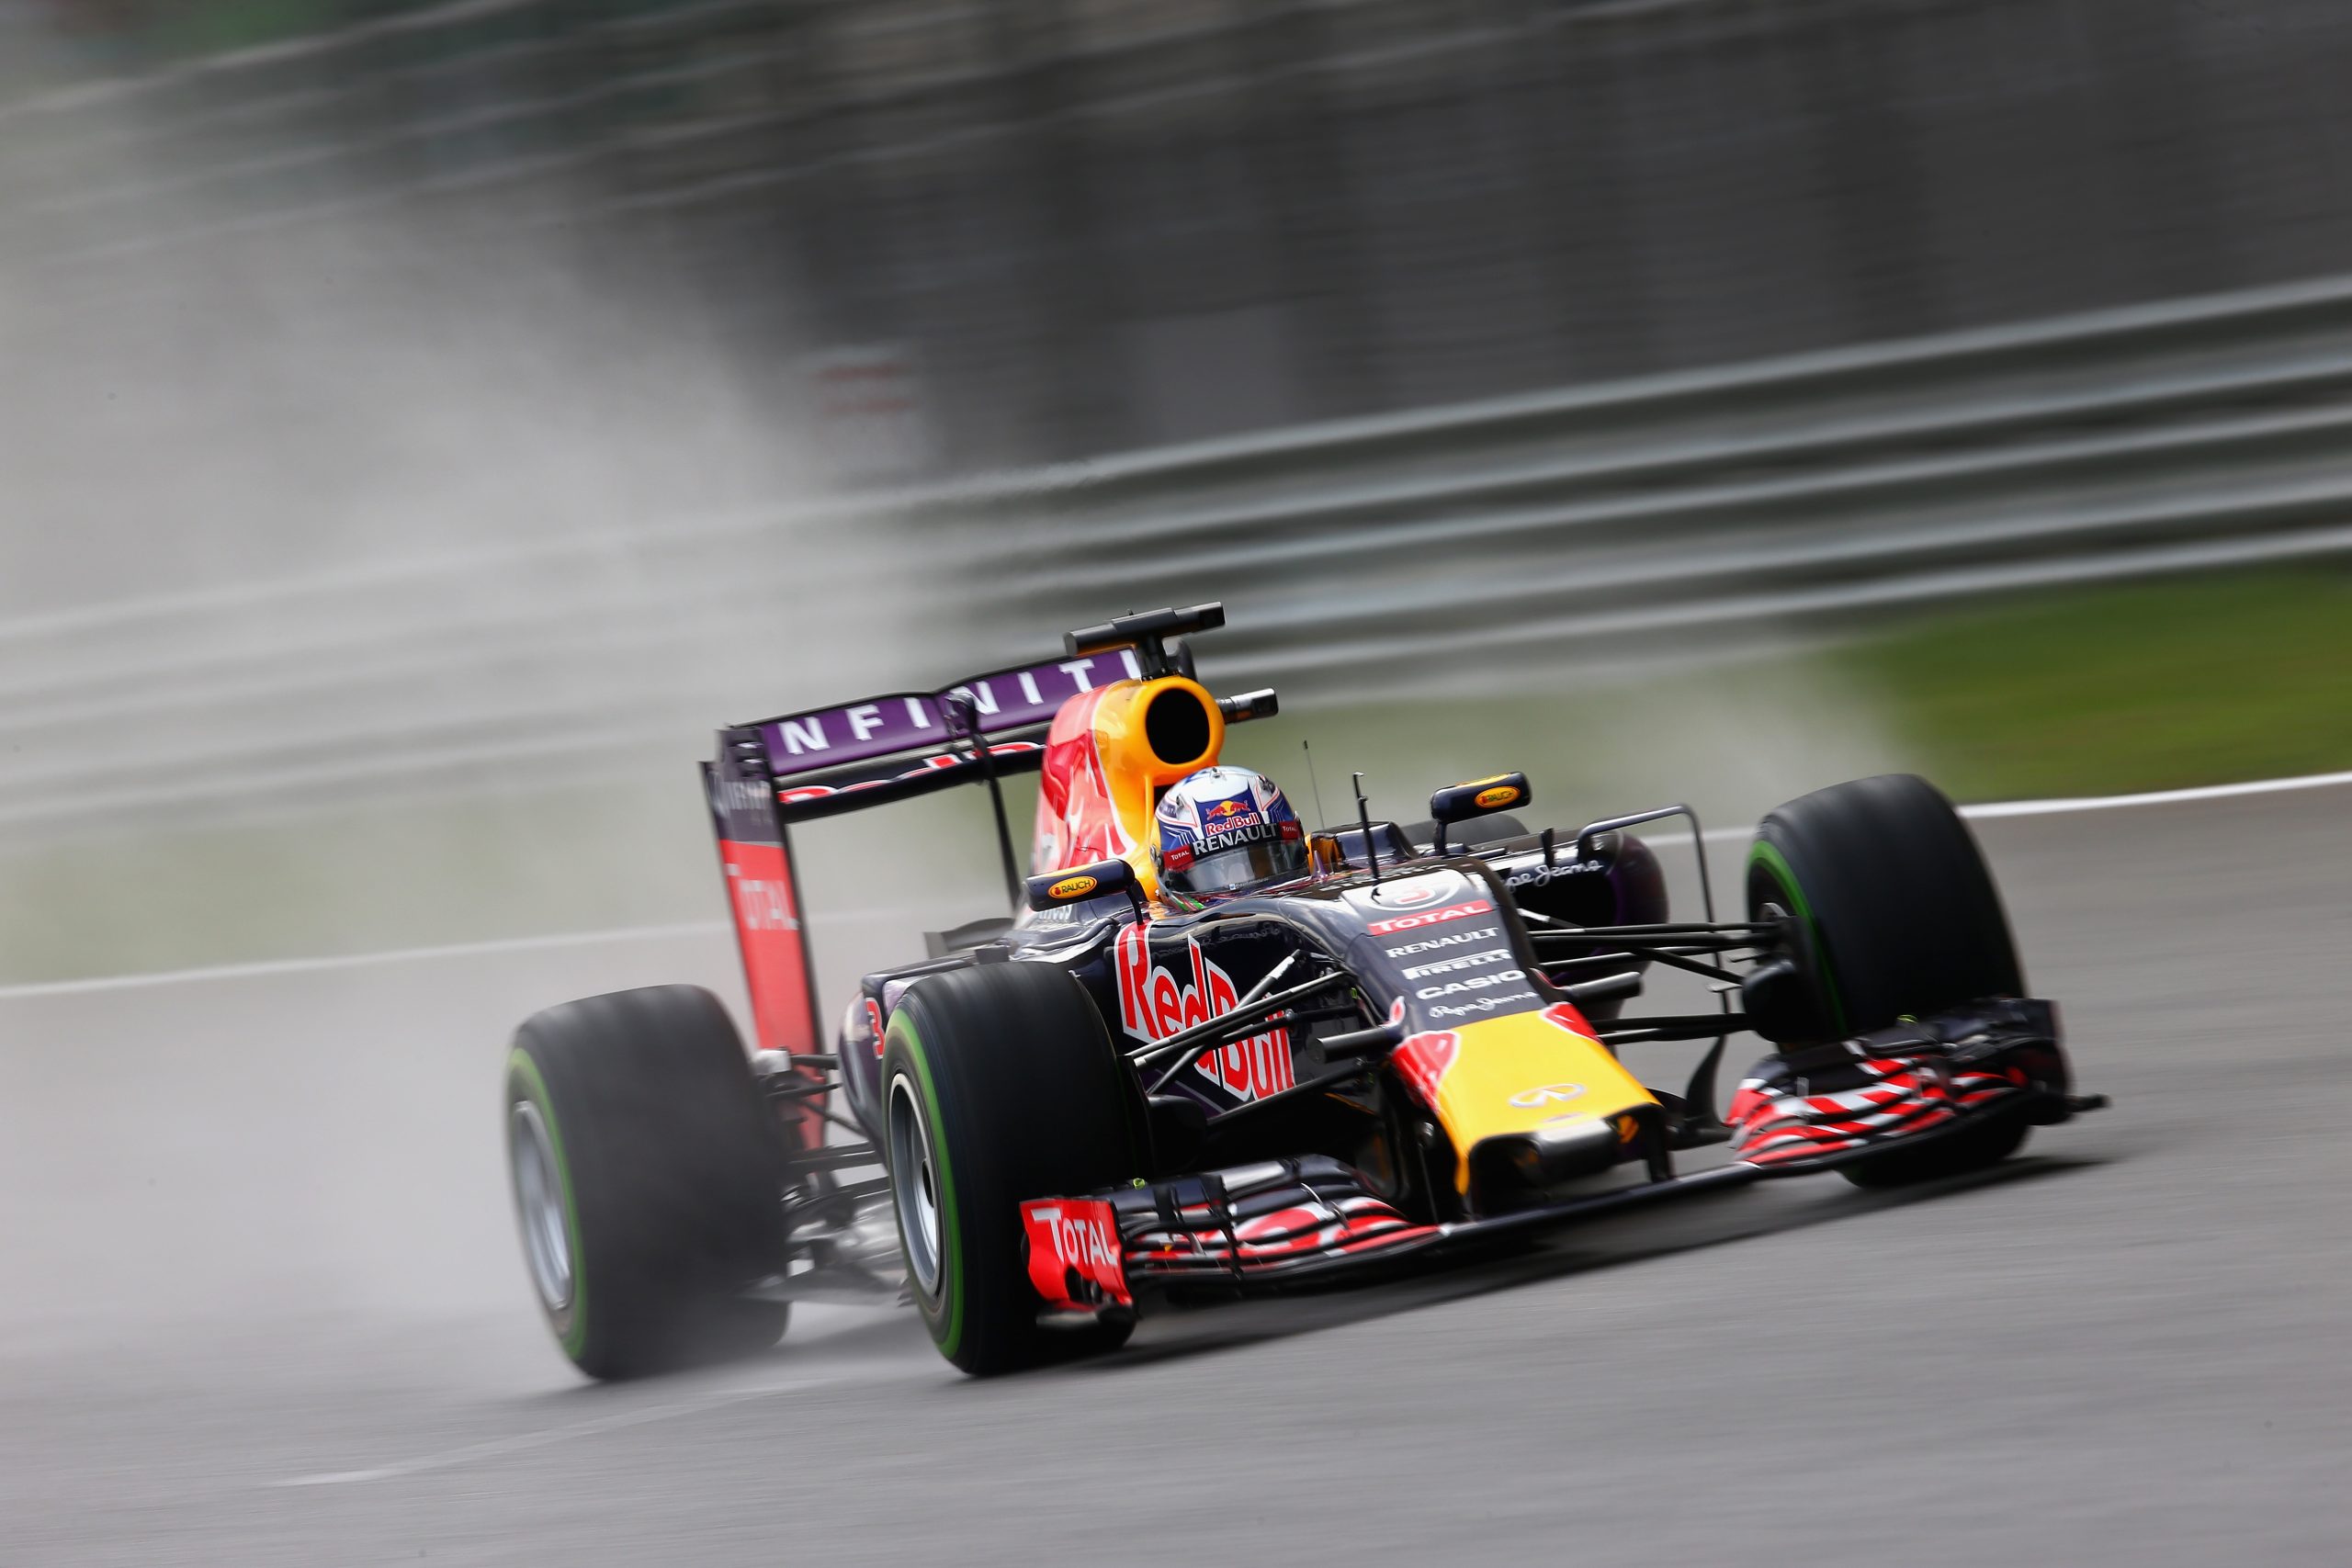 KUALA LUMPUR, MALAYSIA - MARCH 28: Daniel Ricciardo of Australia and Infiniti Red Bull Racing drives during qualifying for the Malaysia Formula One Grand Prix at Sepang Circuit on March 28, 2015 in Kuala Lumpur, Malaysia. (Photo by Clive Mason/Getty Images) // Getty Images / Red Bull Content Pool // SI201503280474 // Usage for editorial use only //